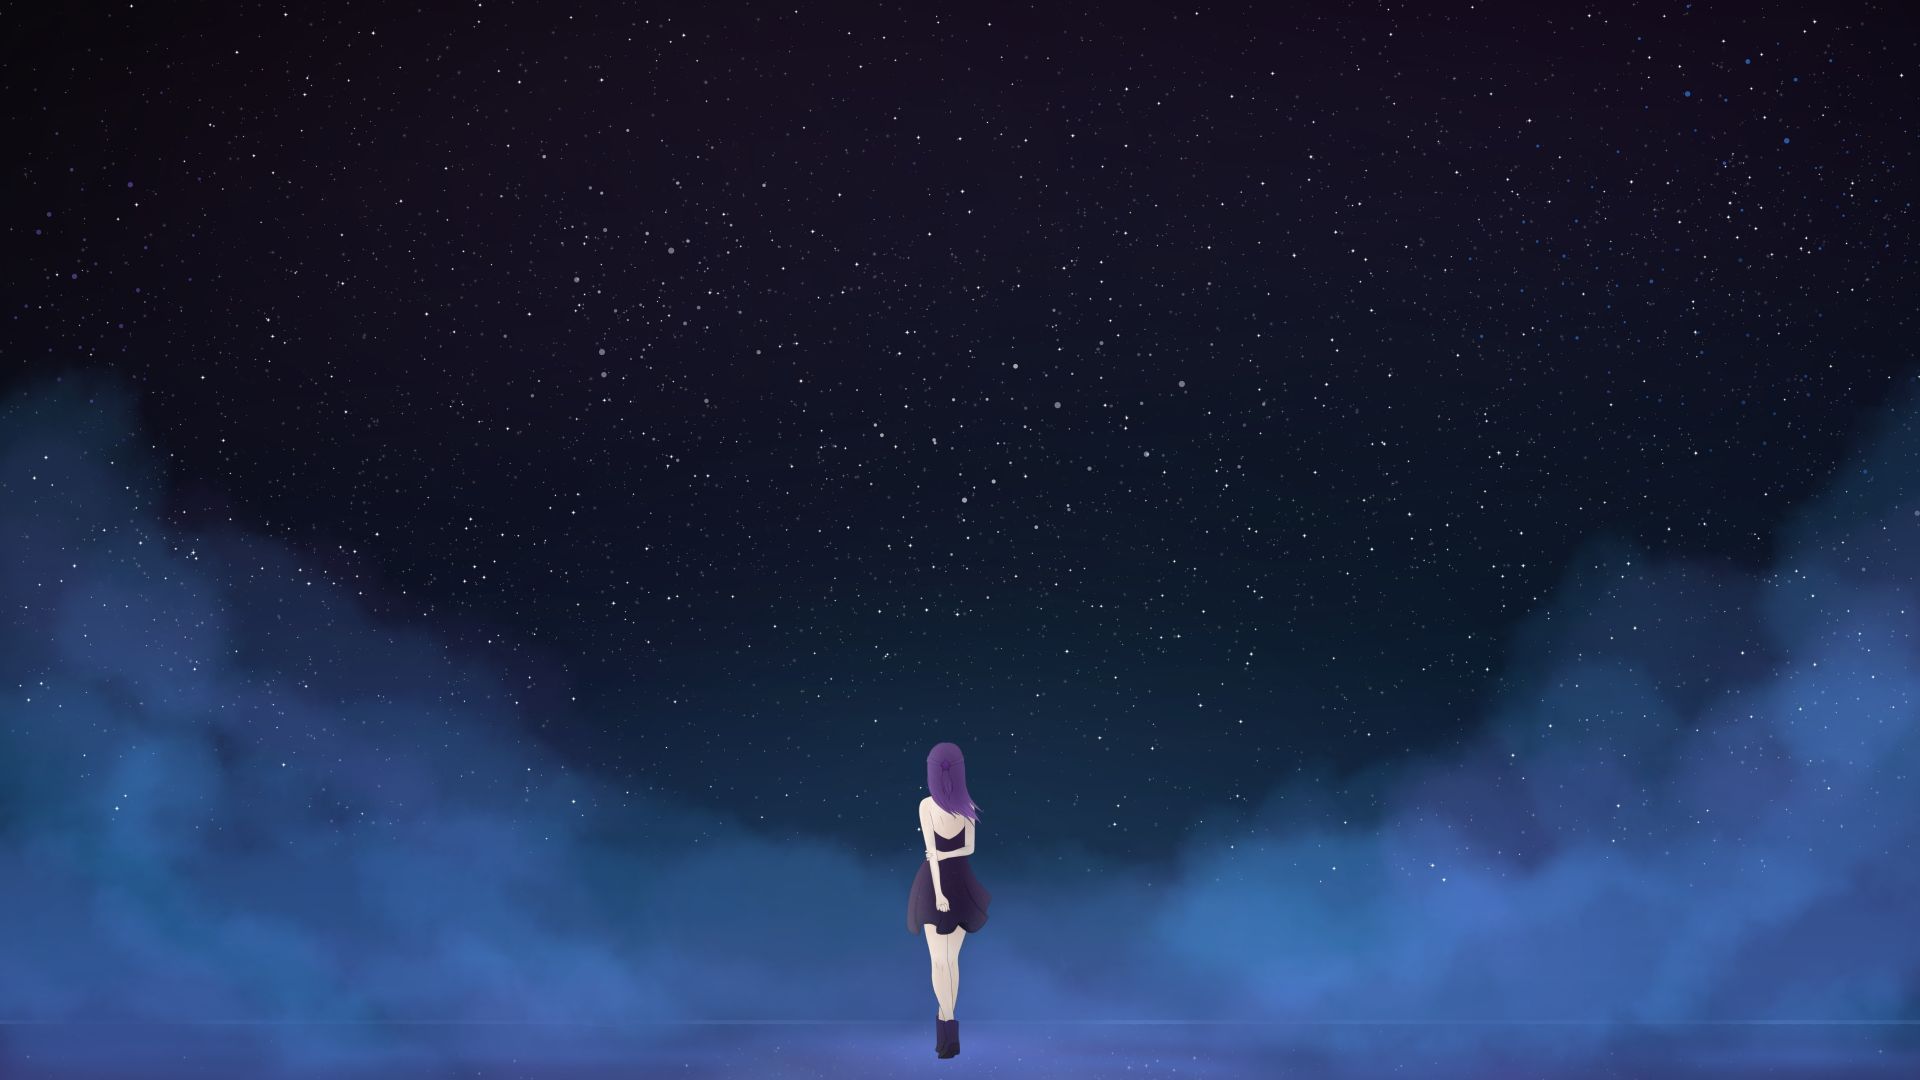 Starry sky, fantasy, anime girl, minimal, night wallpaper, HD image, picture, background, 002d55